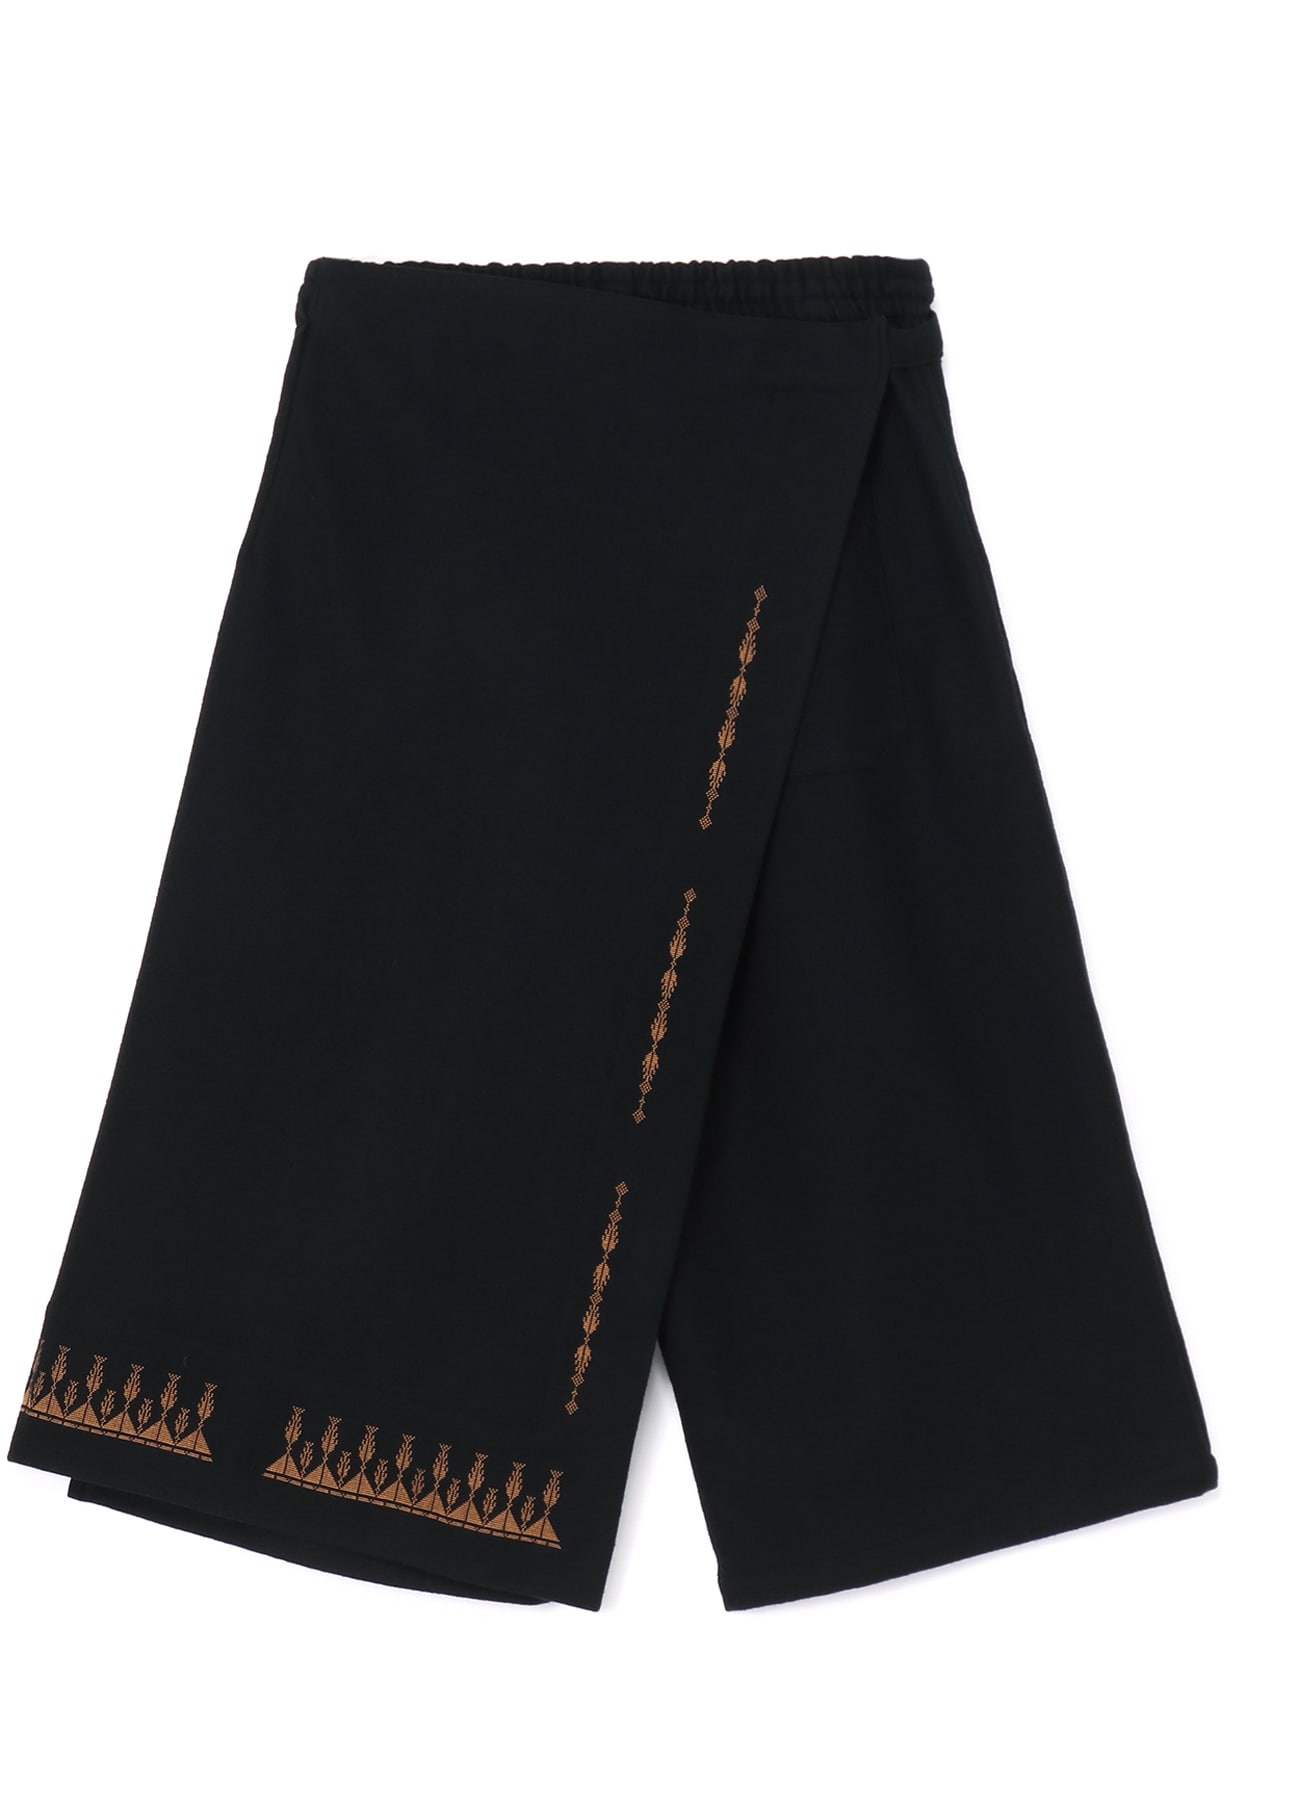 COMPRESSED JERSEY ETHNIC EMBROIDERED WRAP PANTS(M Black): S'YTE 